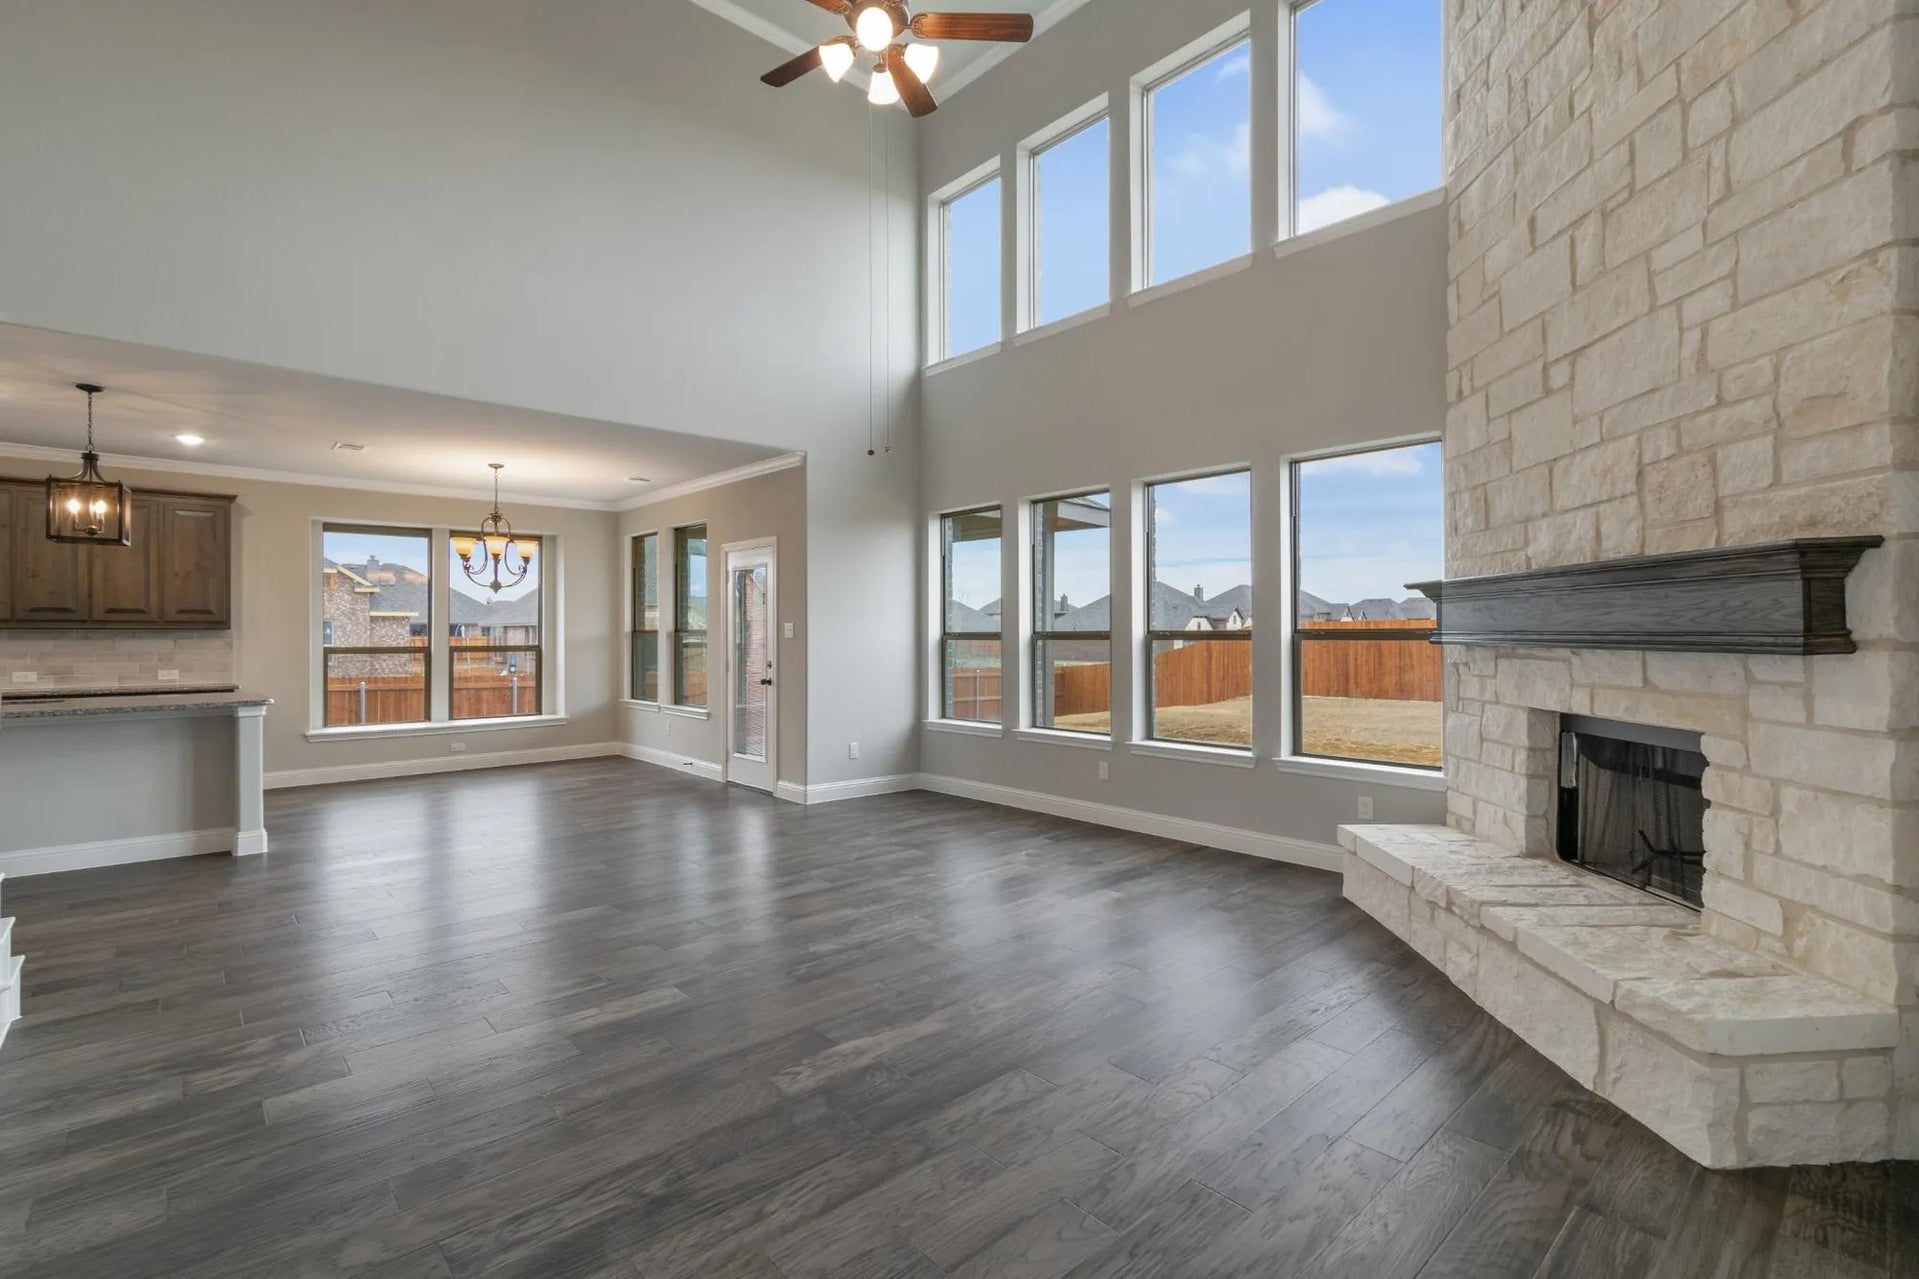 4br New Home in Burleson, TX